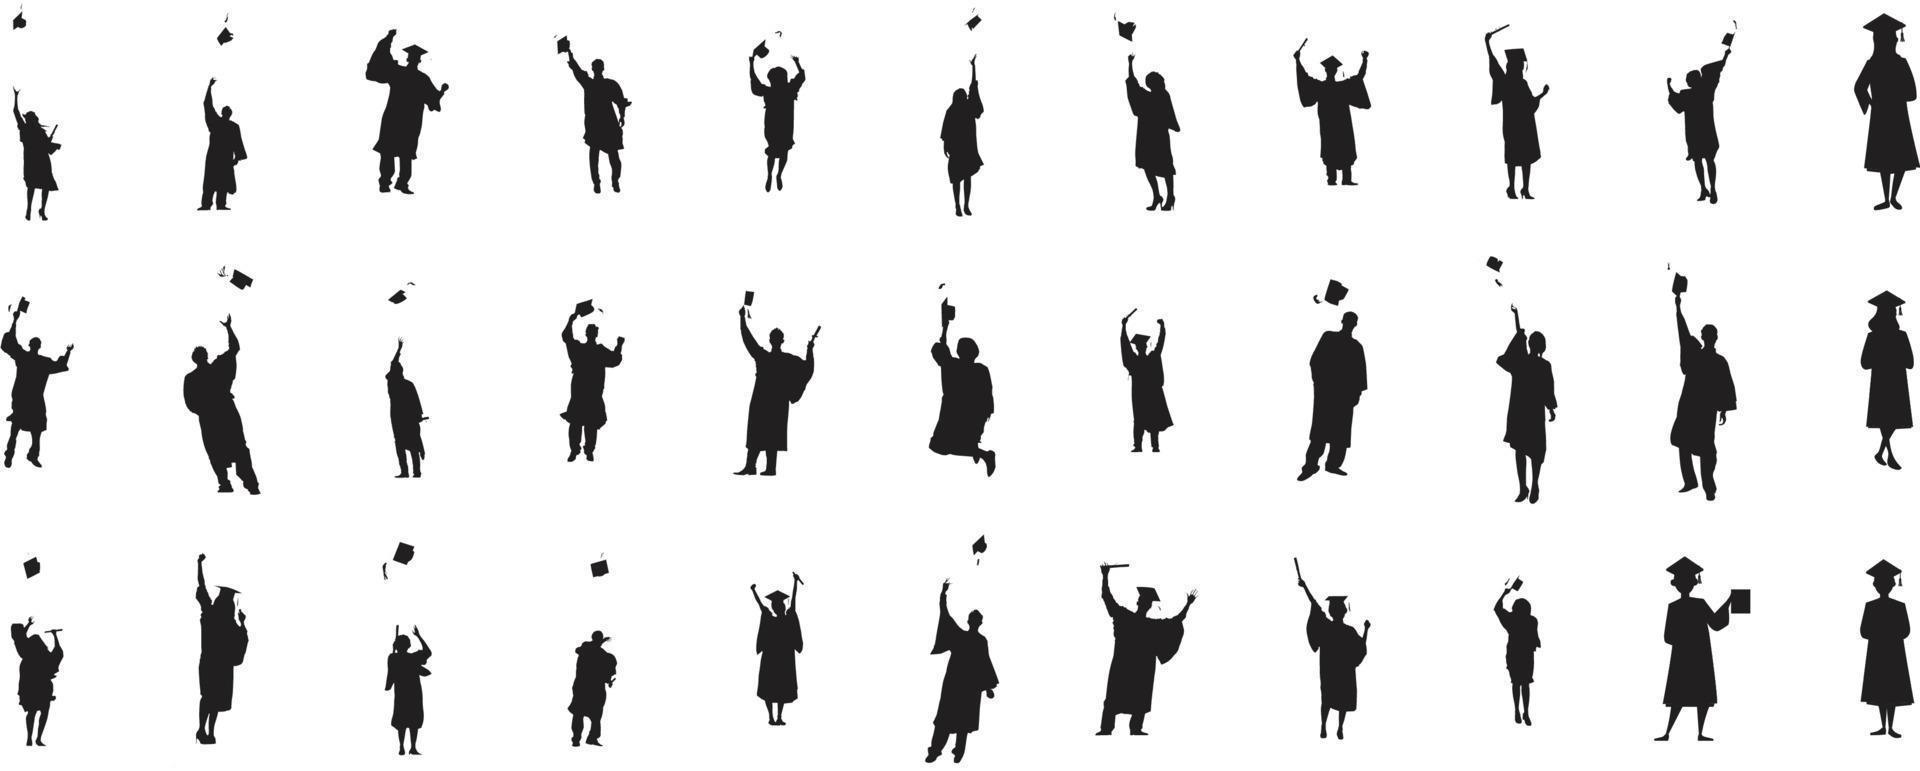 Happy graduate students with graduating caps and diploma or certificates, silhouette of group of people. Graduation event. Vector illustration